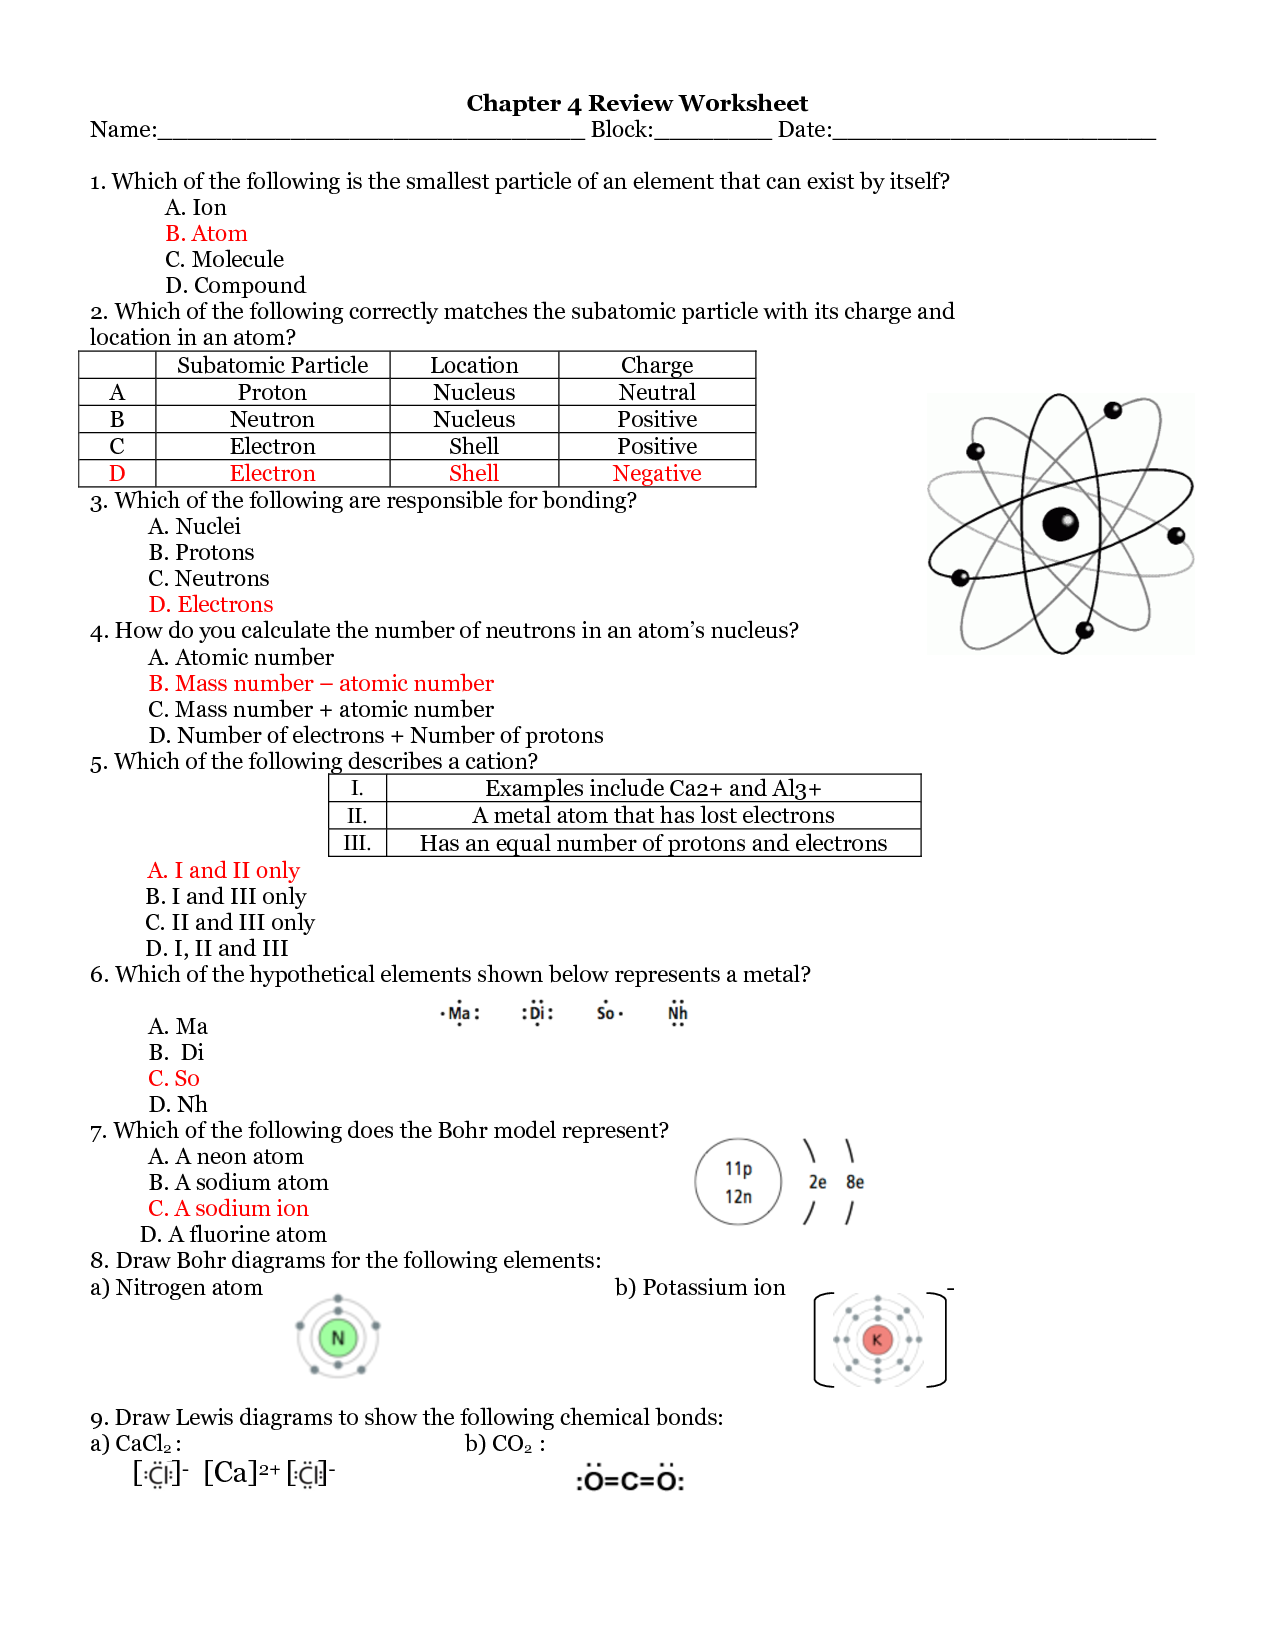 20 Best Images of Molecules Worksheet Answers Key Of Life Building